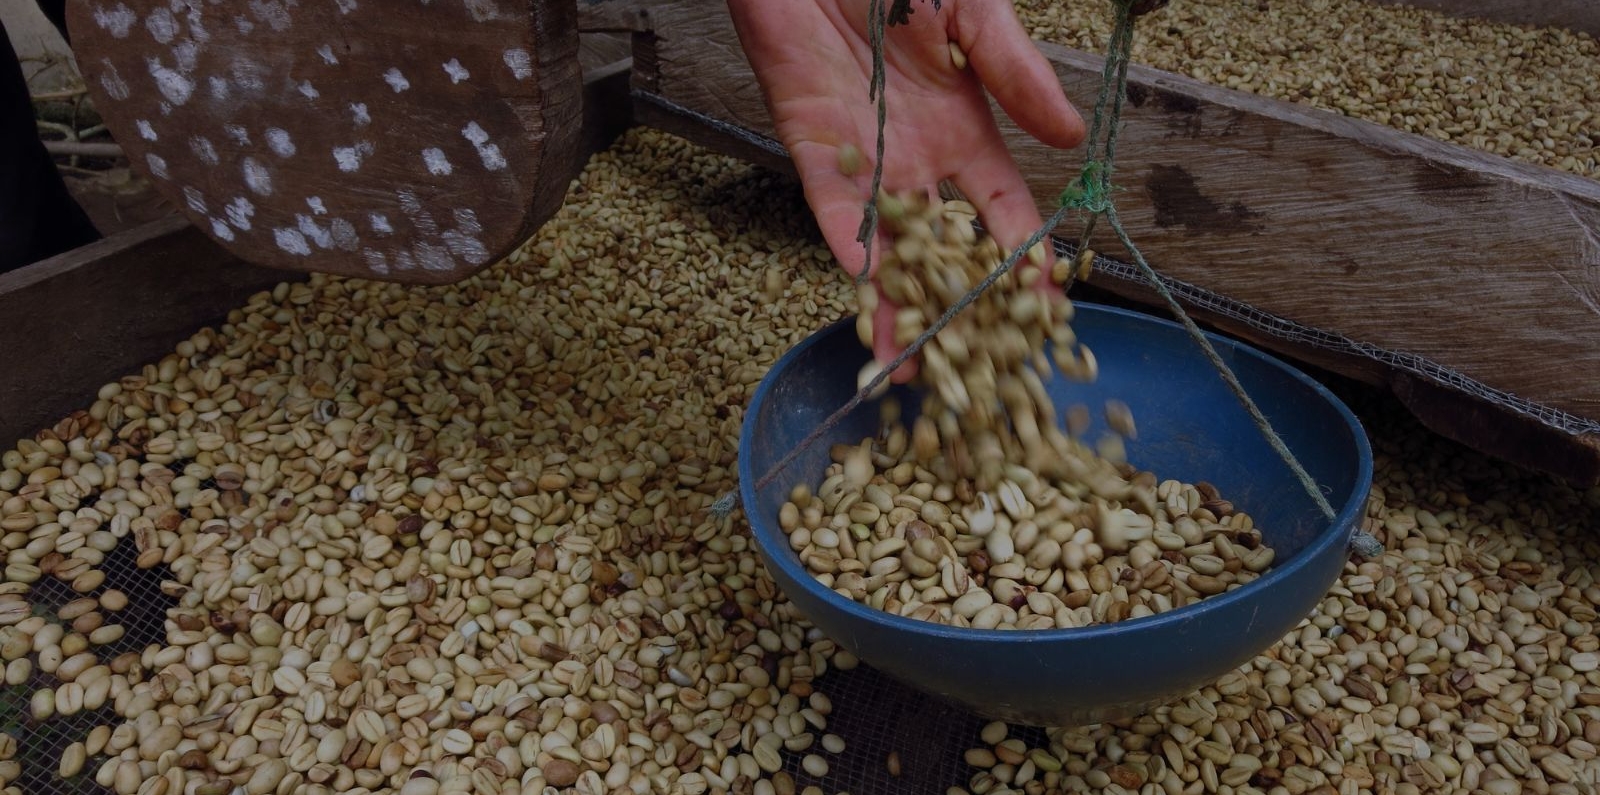 Raw coffee beans and hands, preparation for drying process